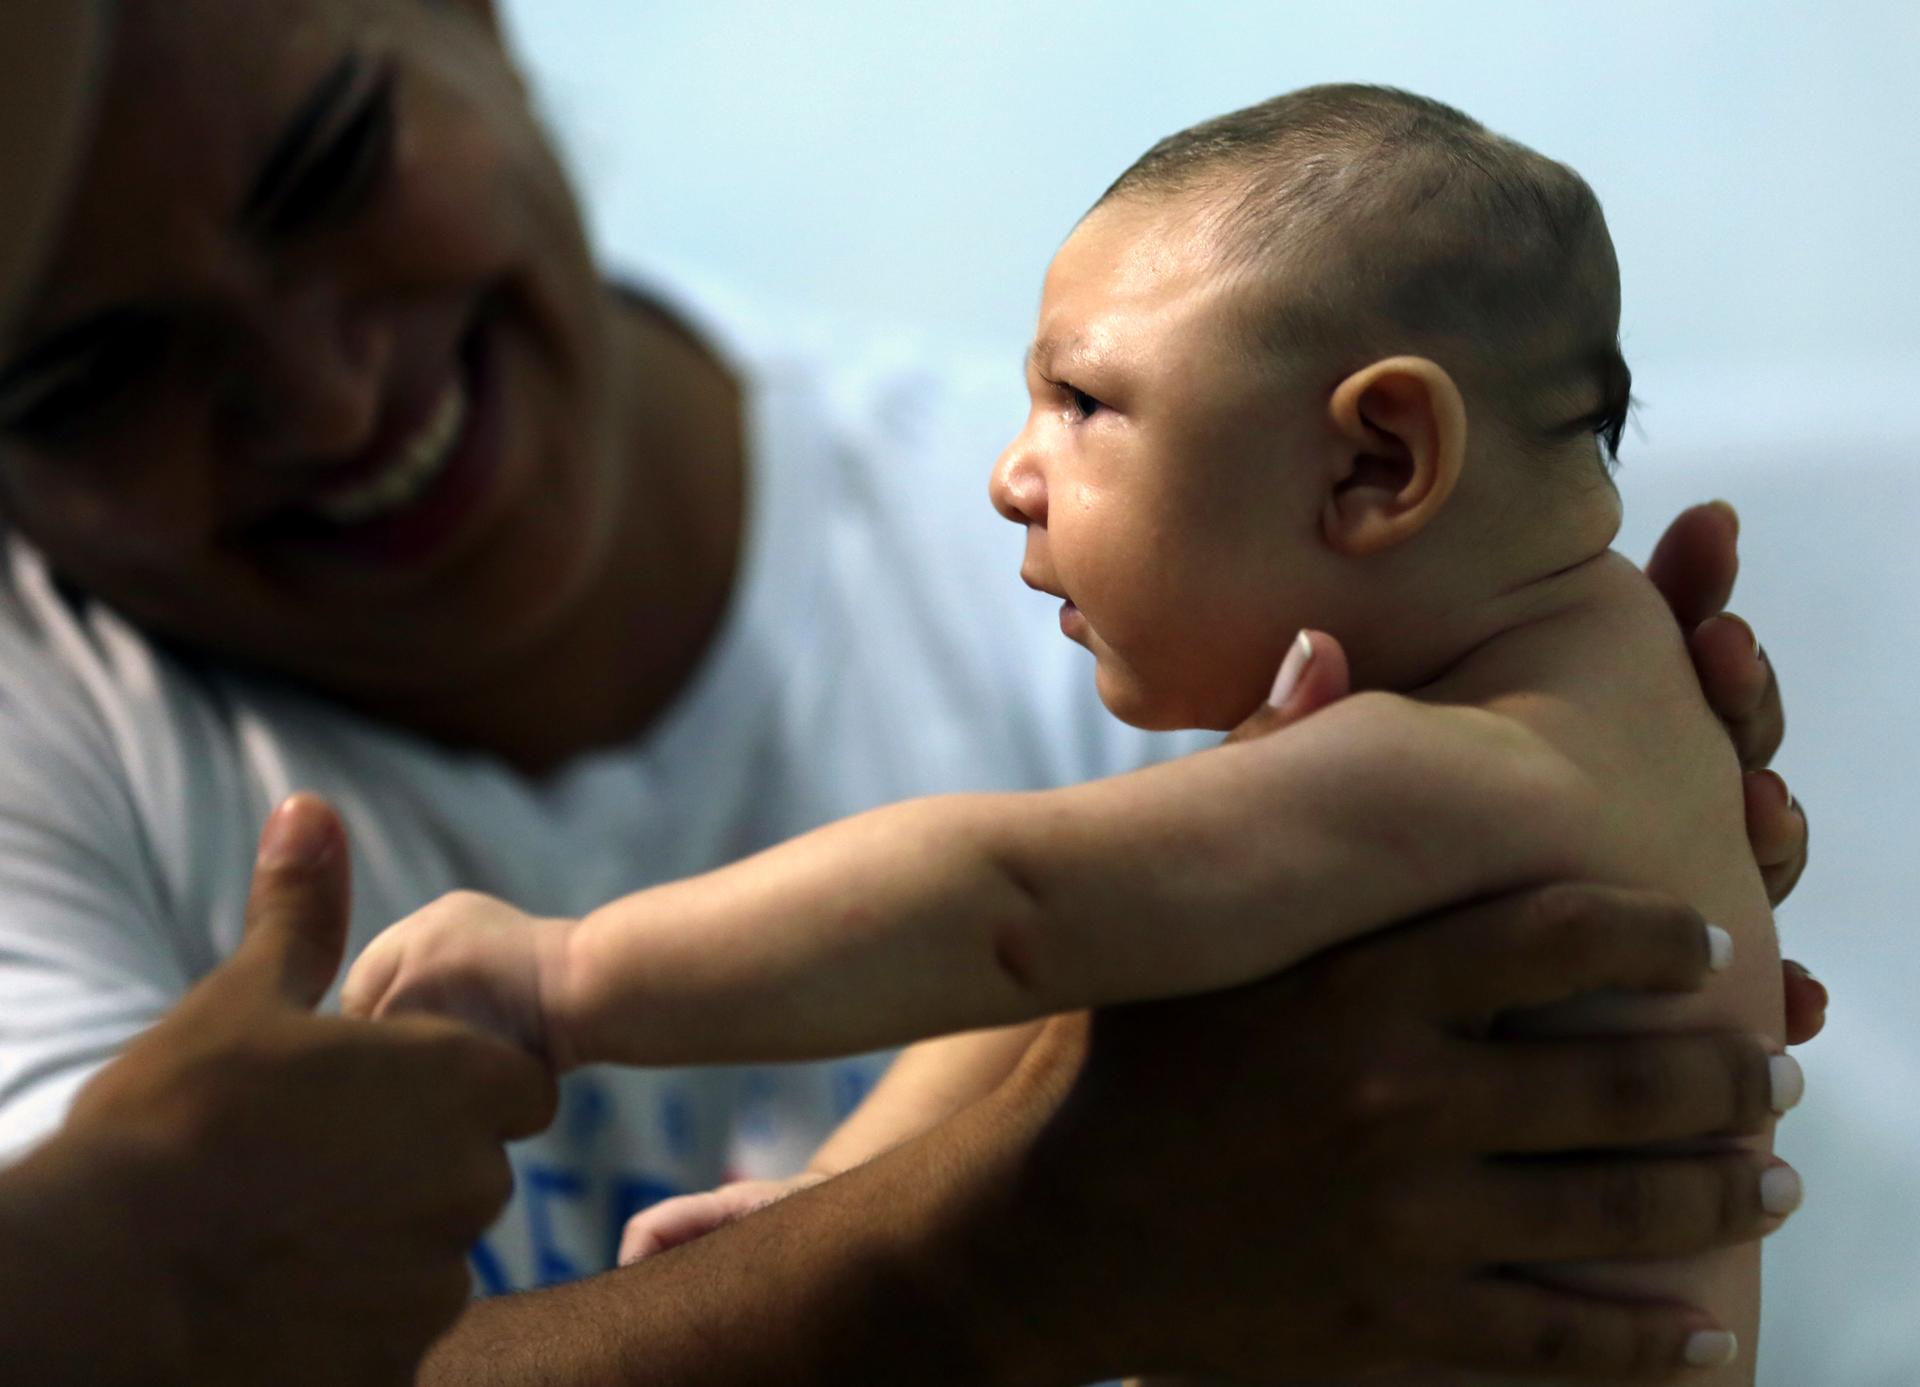 Therapist Rozely Fontoura holds Juan Pedro, a baby with microcephaly, in Recife, Brazil on March 26.